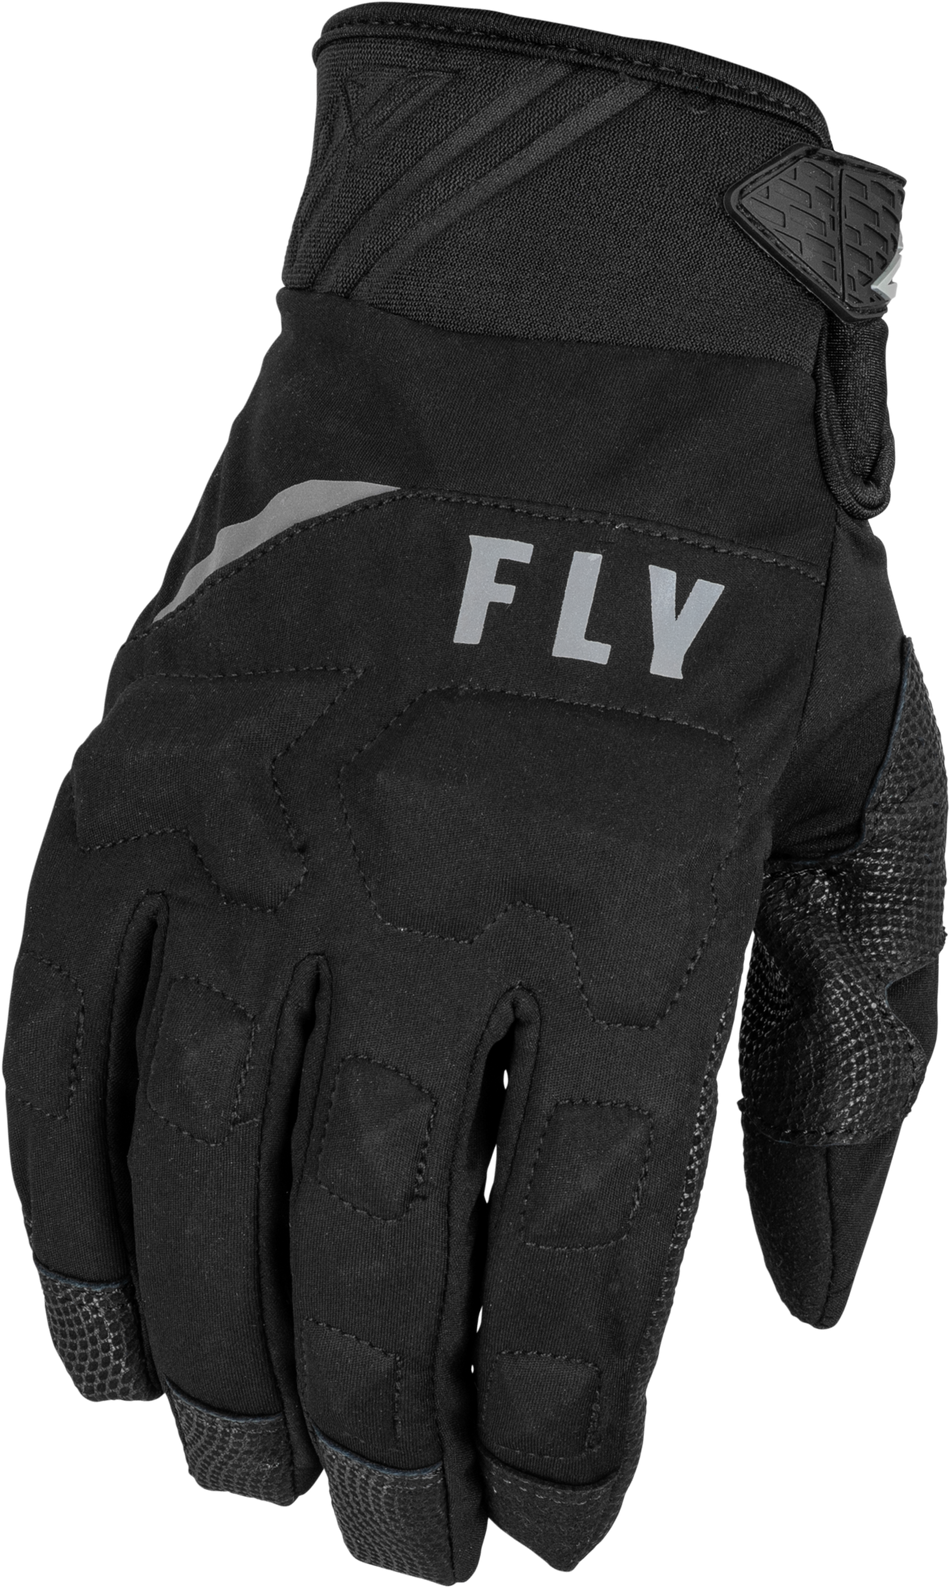 FLY RACING Boundary Gloves Black Md 371-0700M